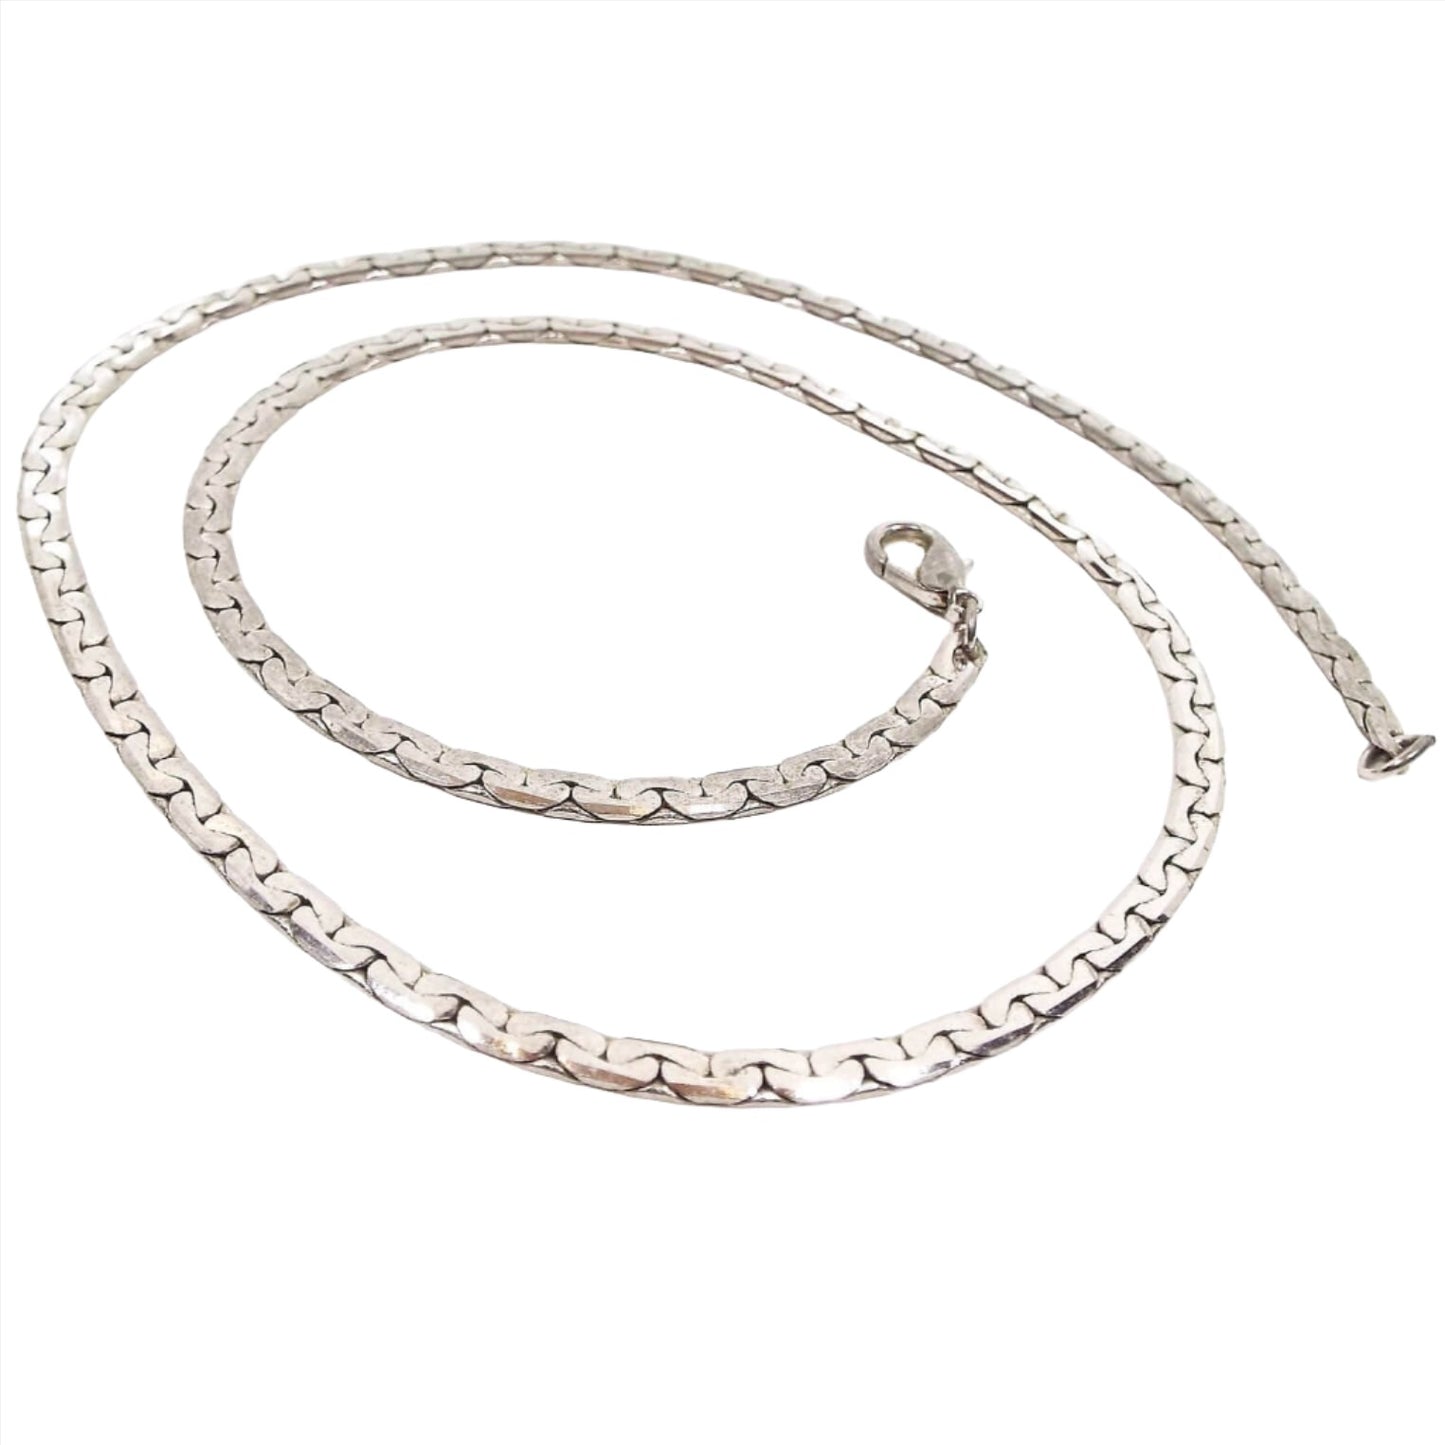 Chain necklace is silver in color and flat in style with interlocked rounded half moon shapes on each side. There is a lobster clasp on the end.